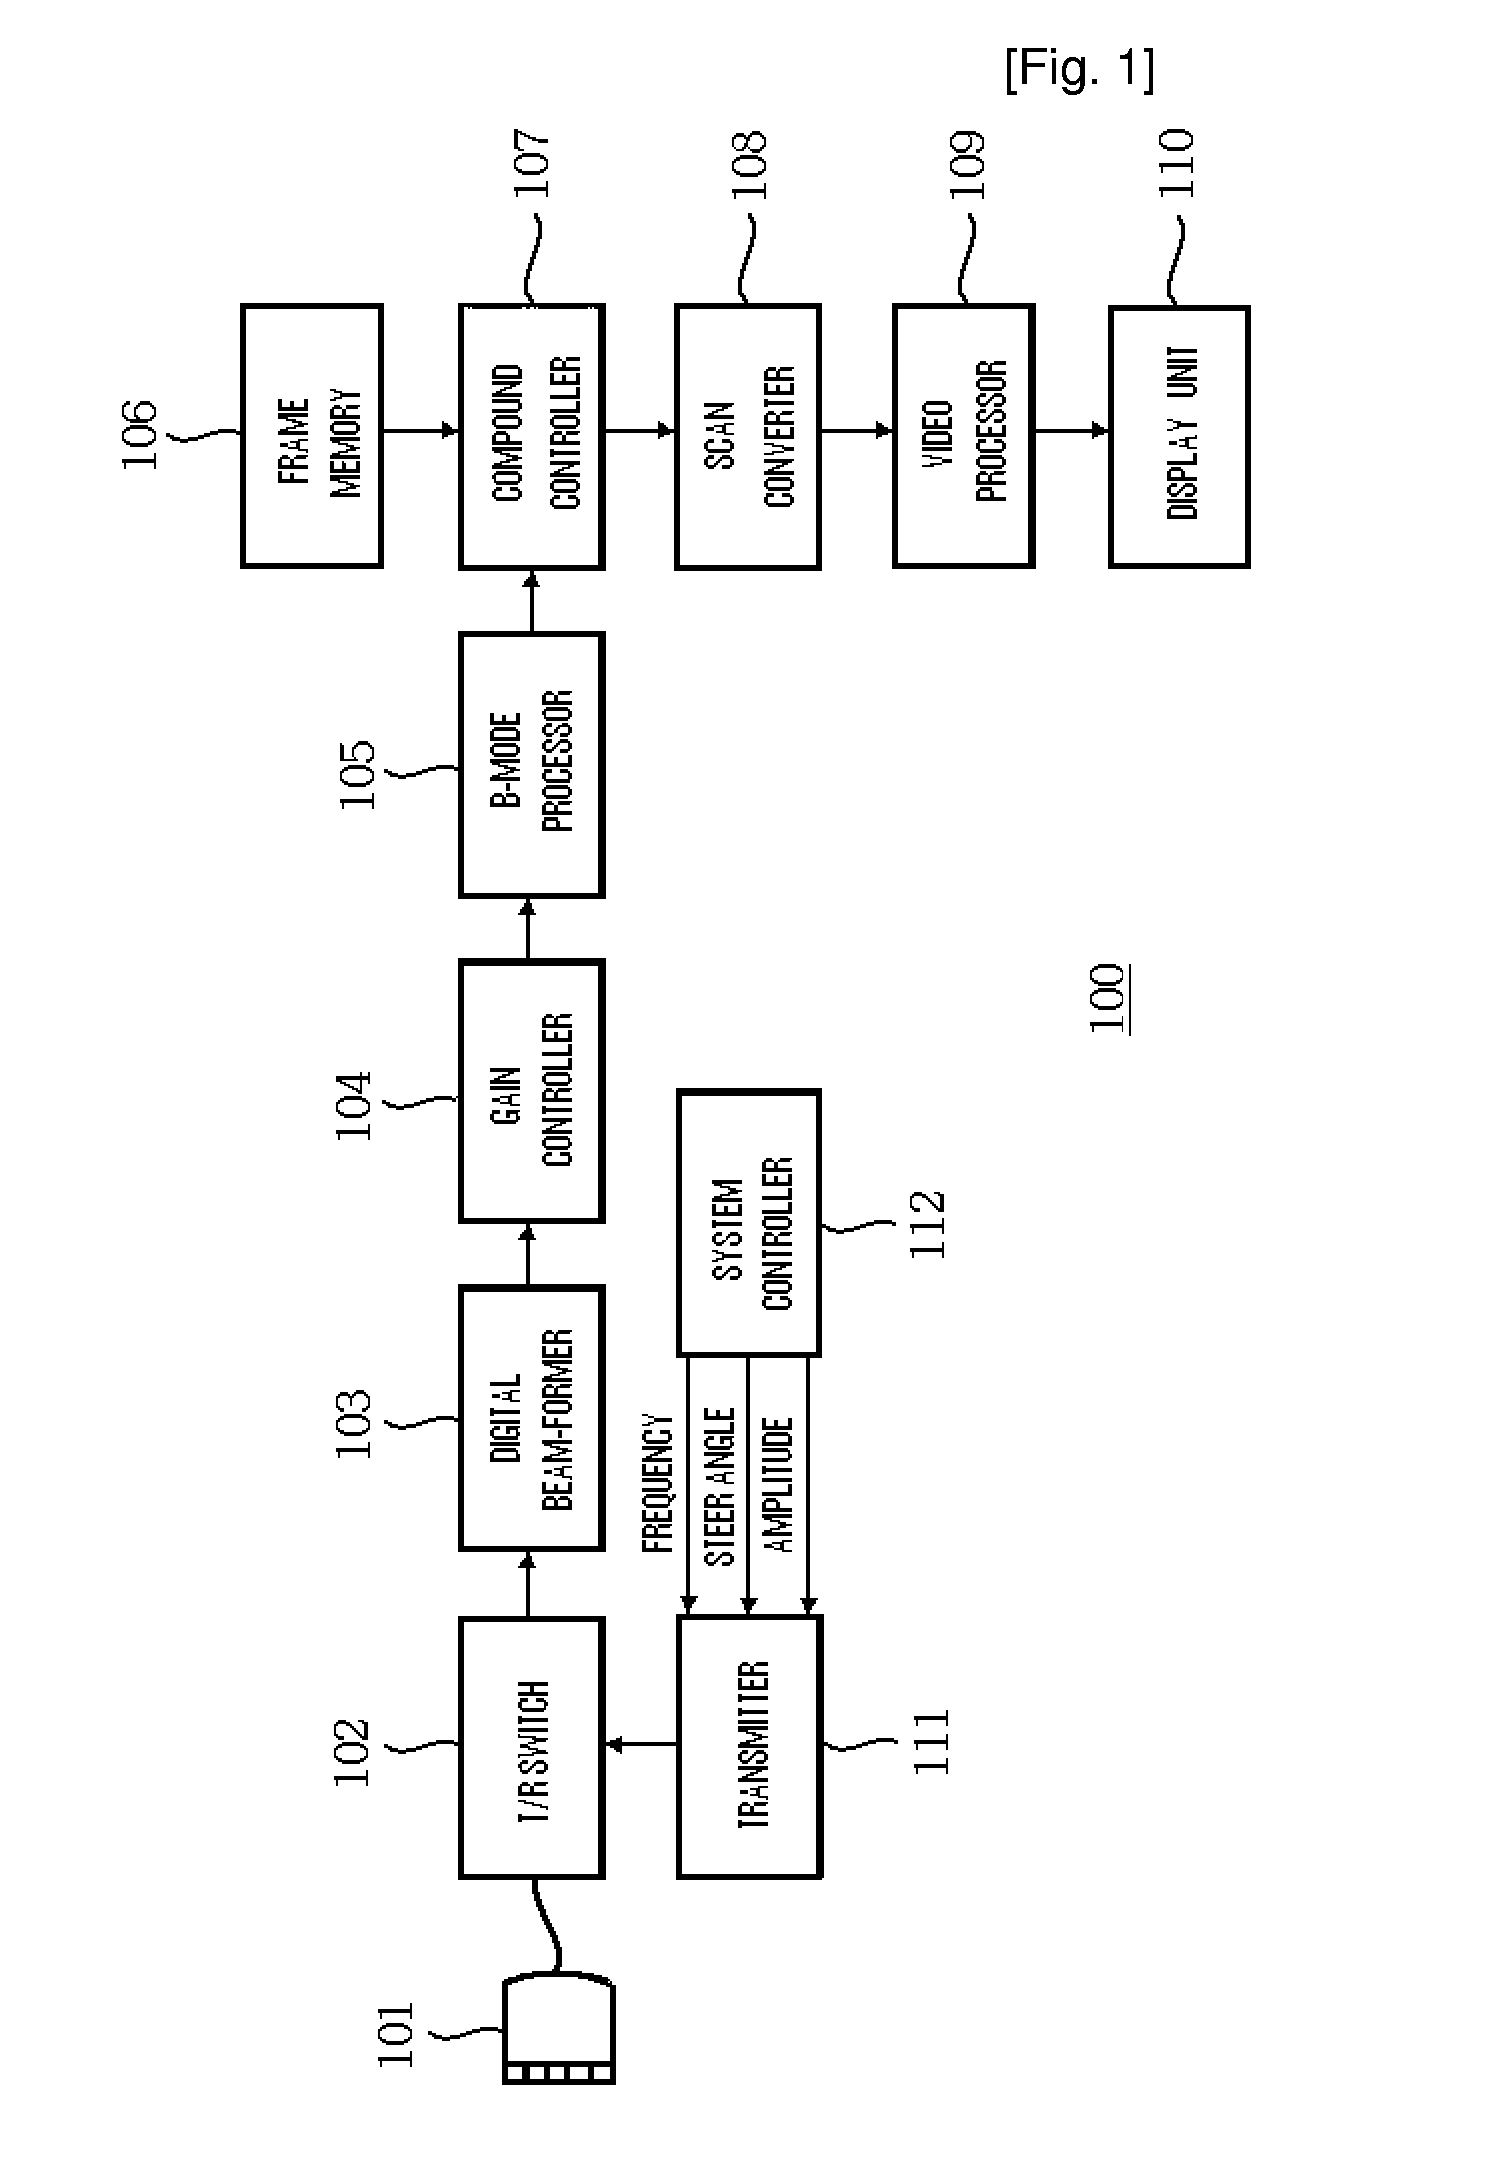 Method of Compounding and Ultrasound Image